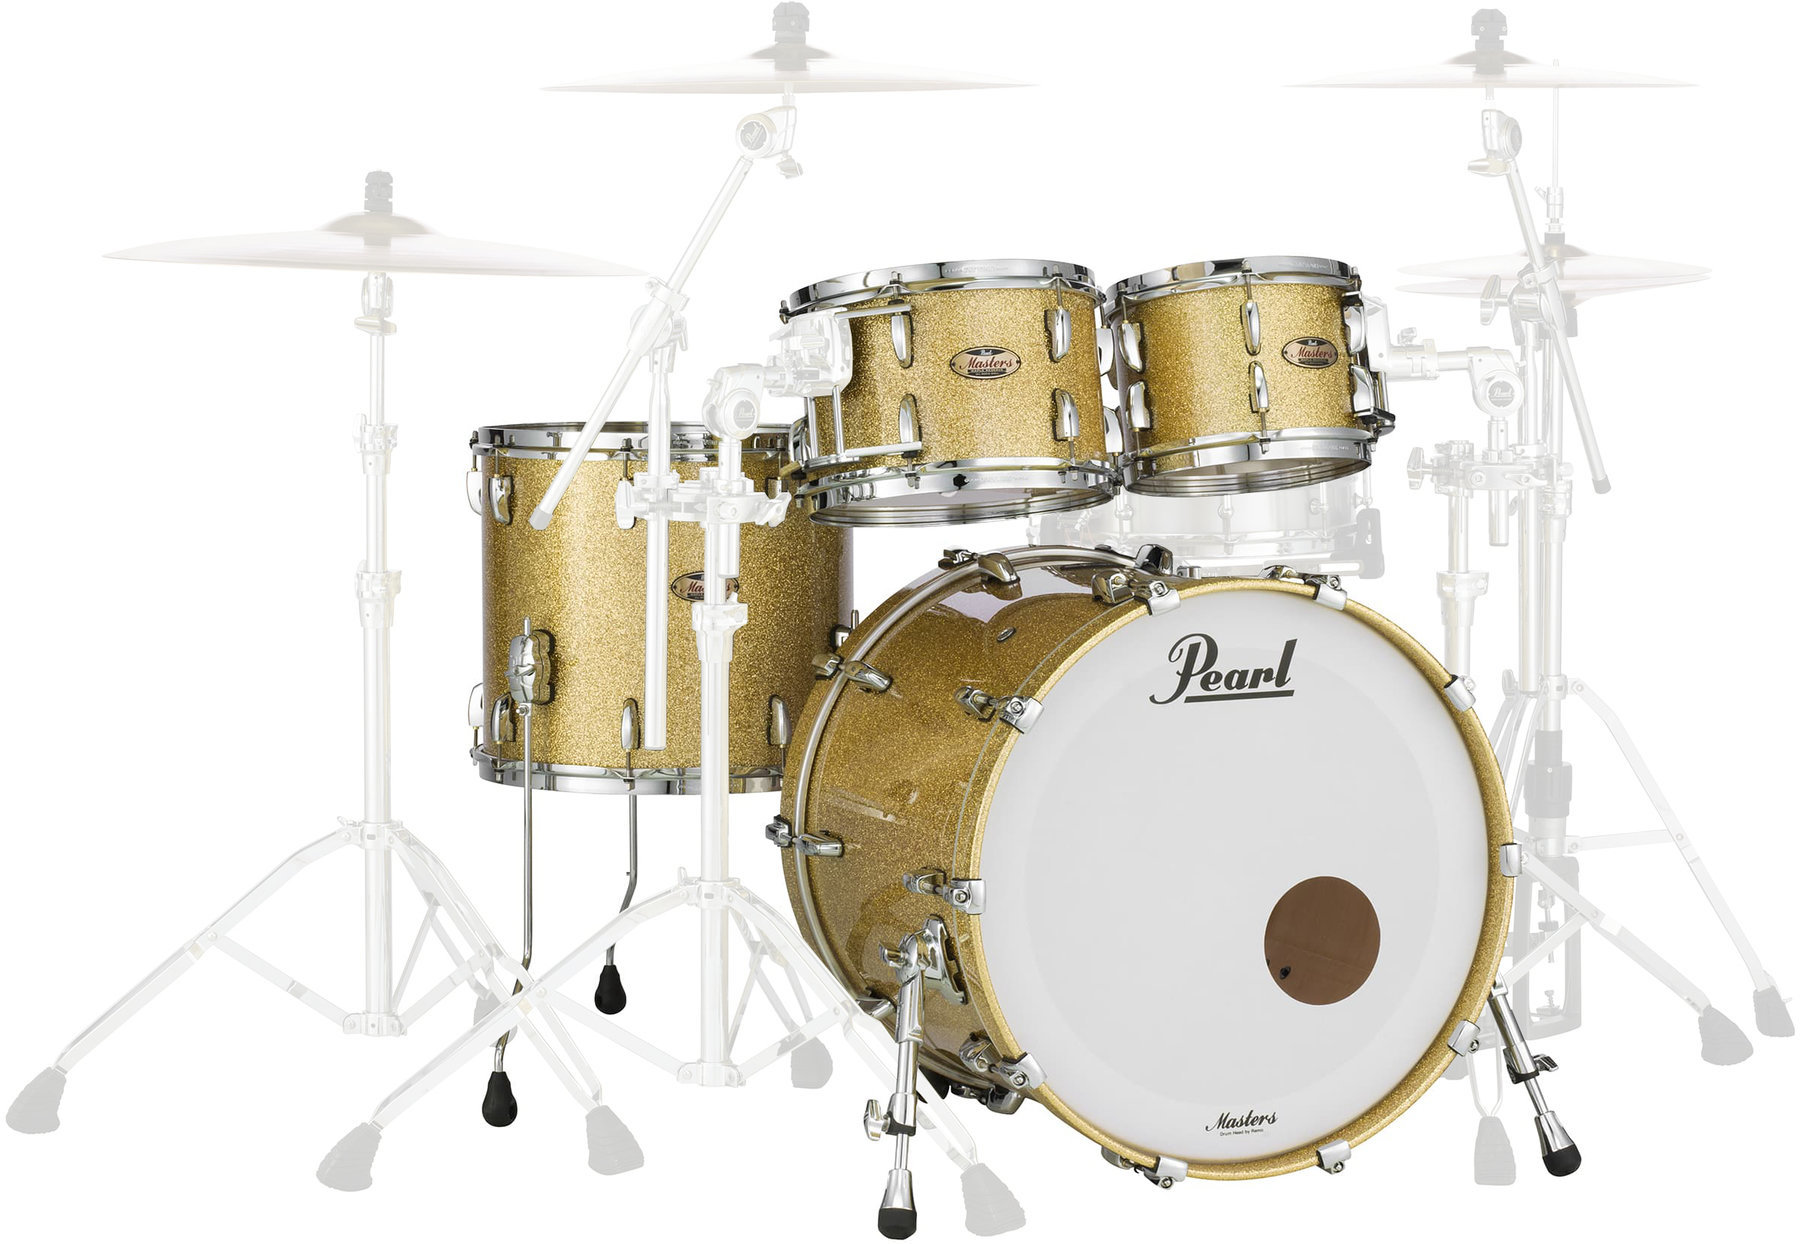 Akustik-Drumset Pearl MRV924XEFP-C347 Masters Maple Reserve Bombay Gold Sparkle